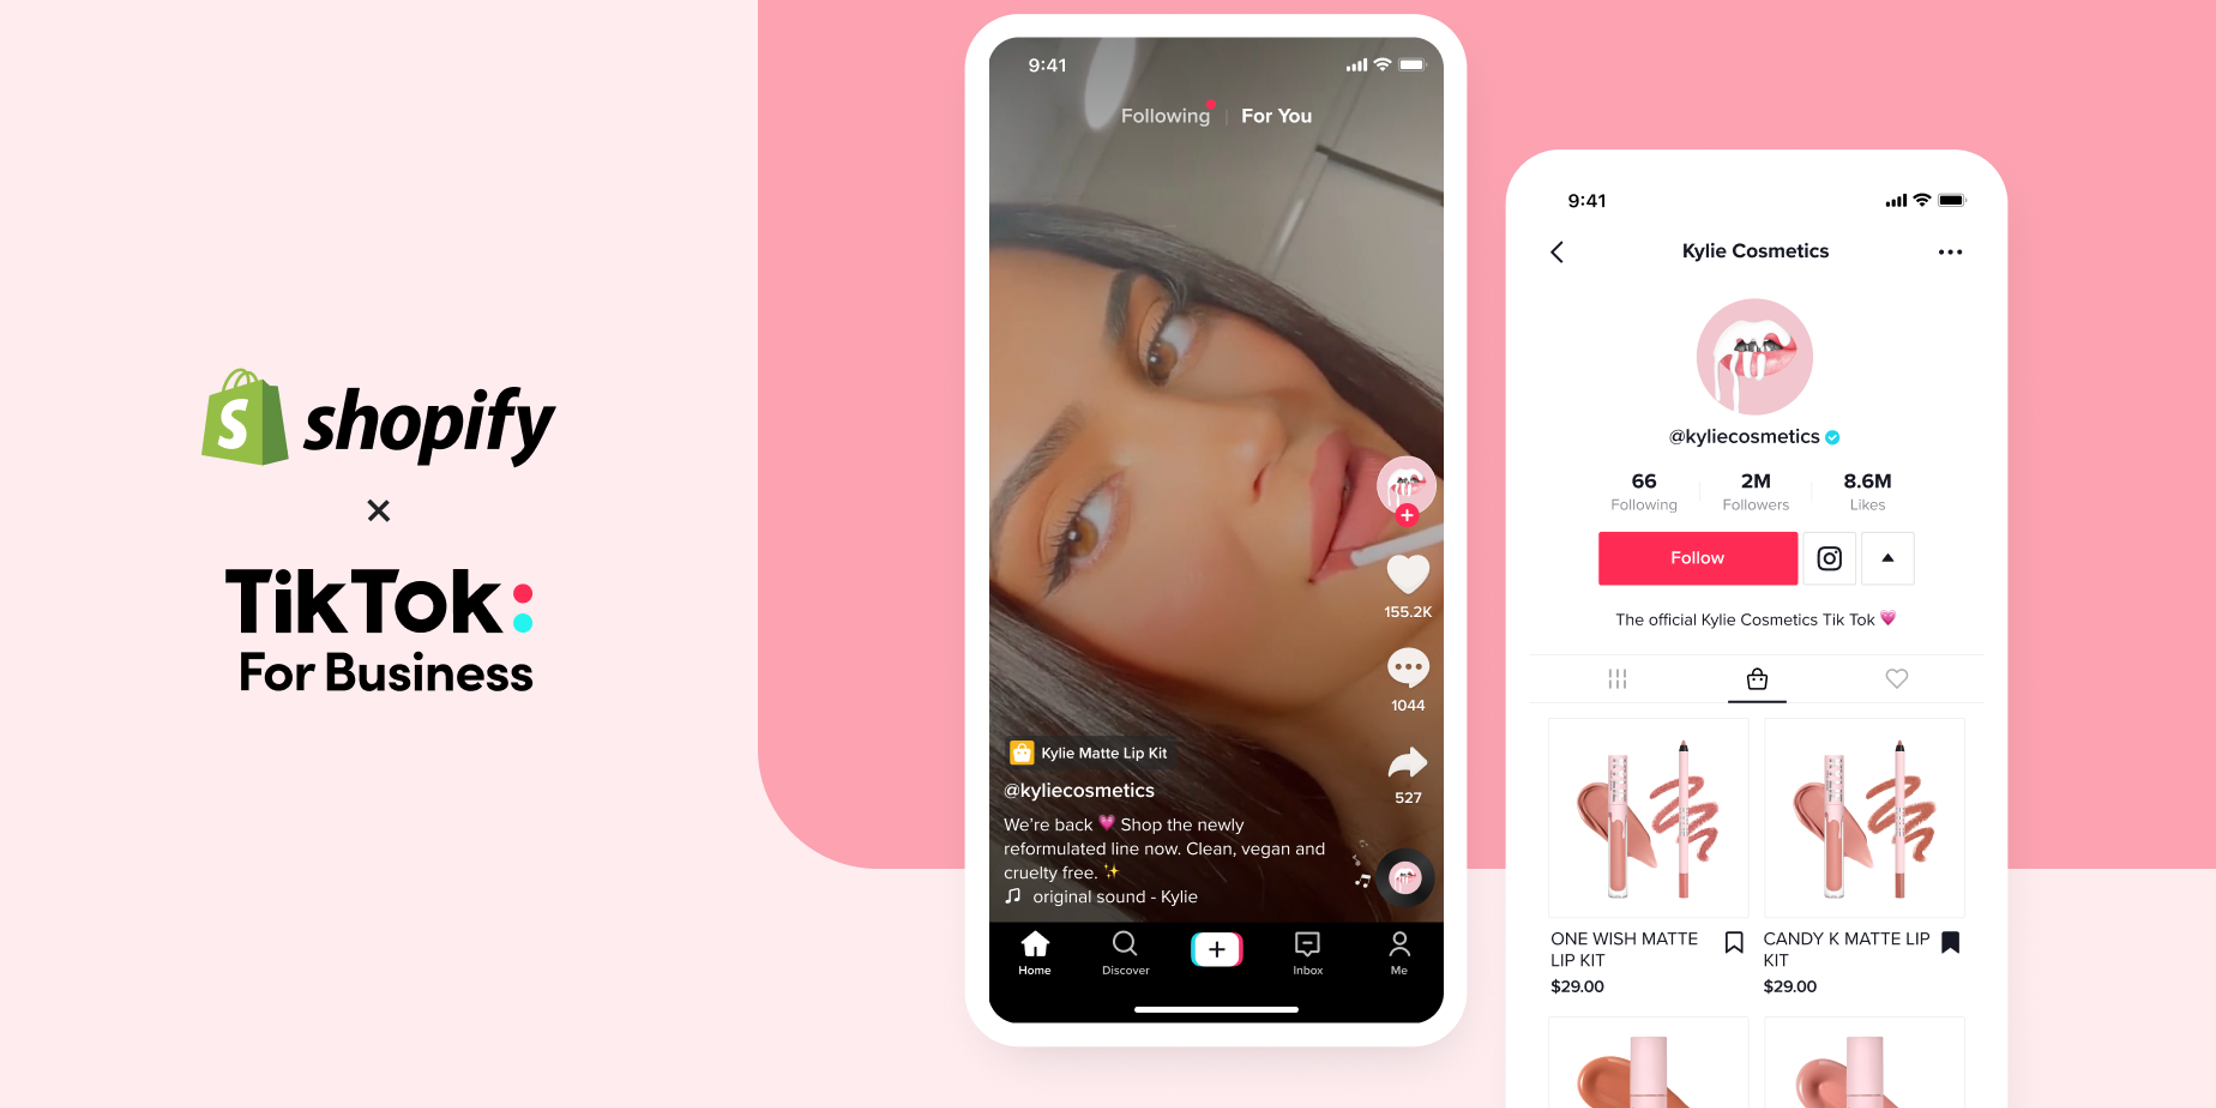 Shopify and TikTok partnership for in-app shopping